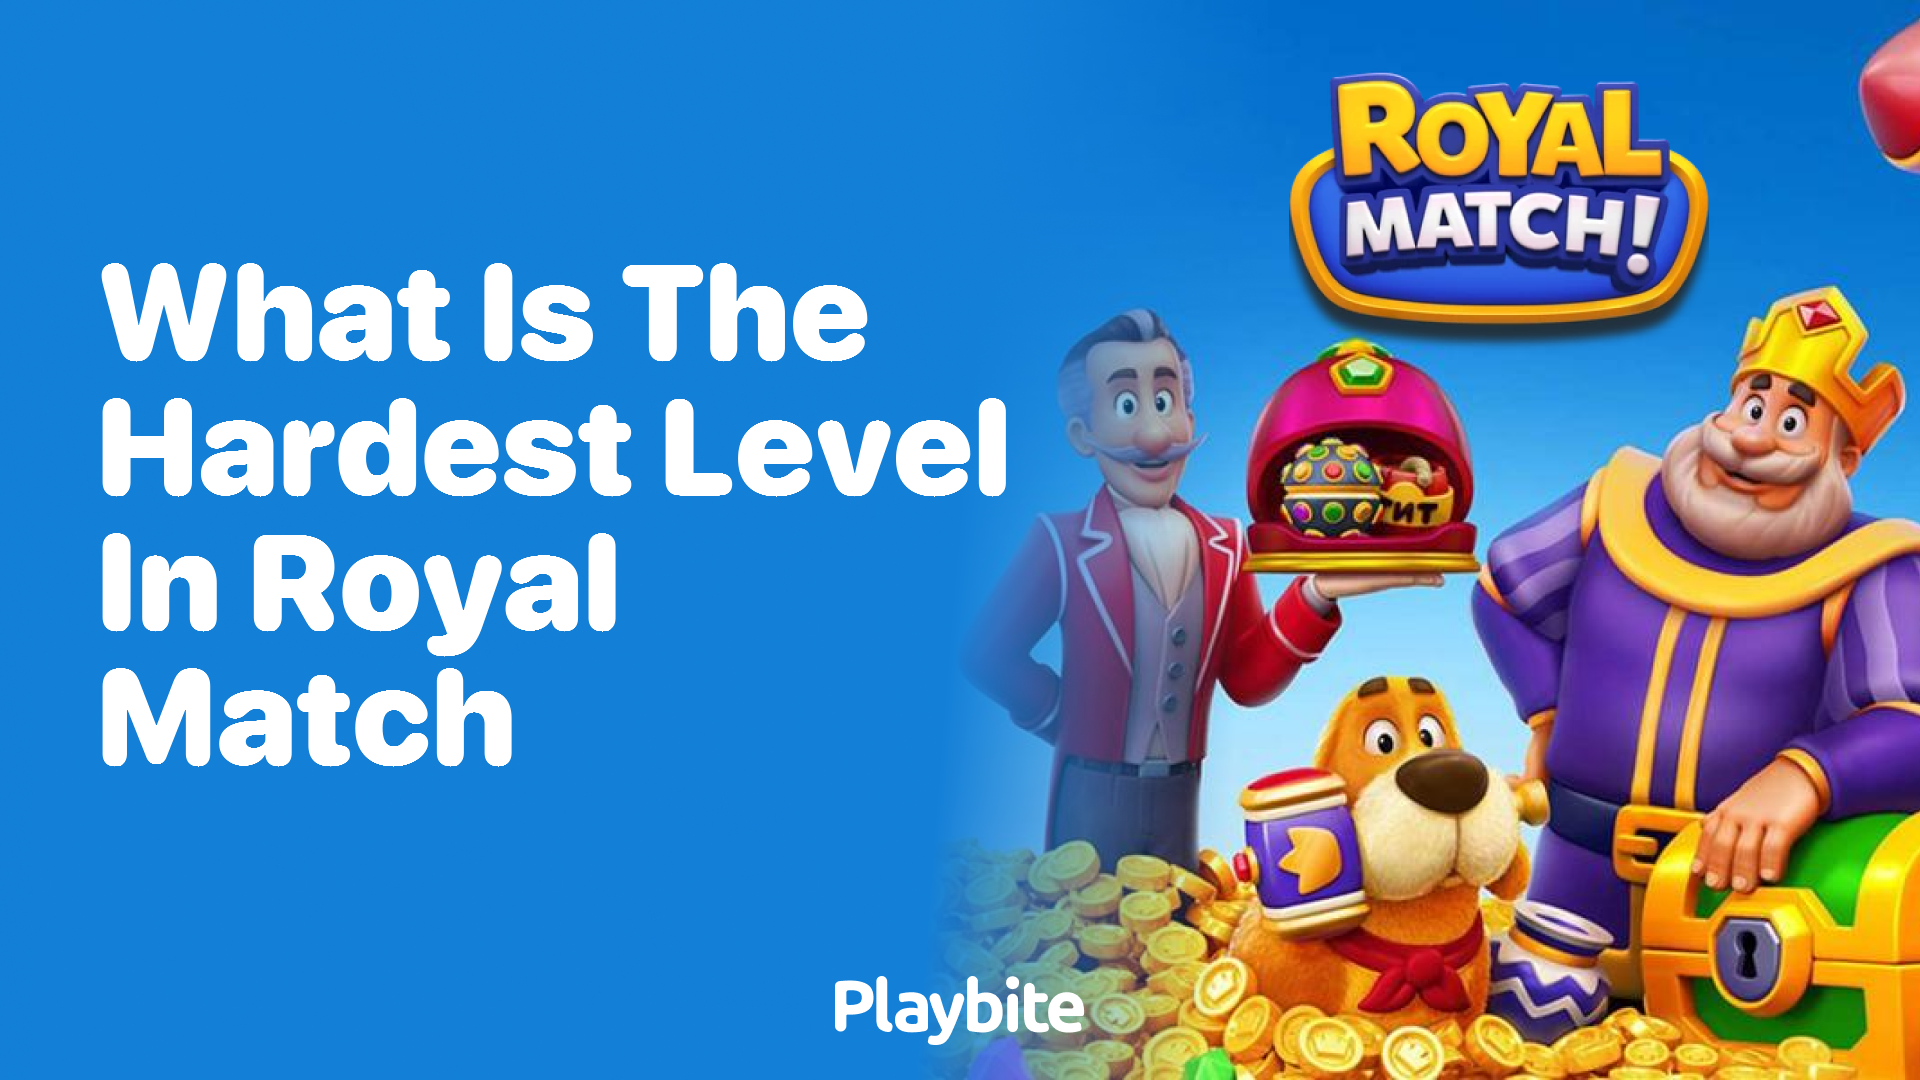 What Is the Hardest Level in Royal Match? Find Out Here!